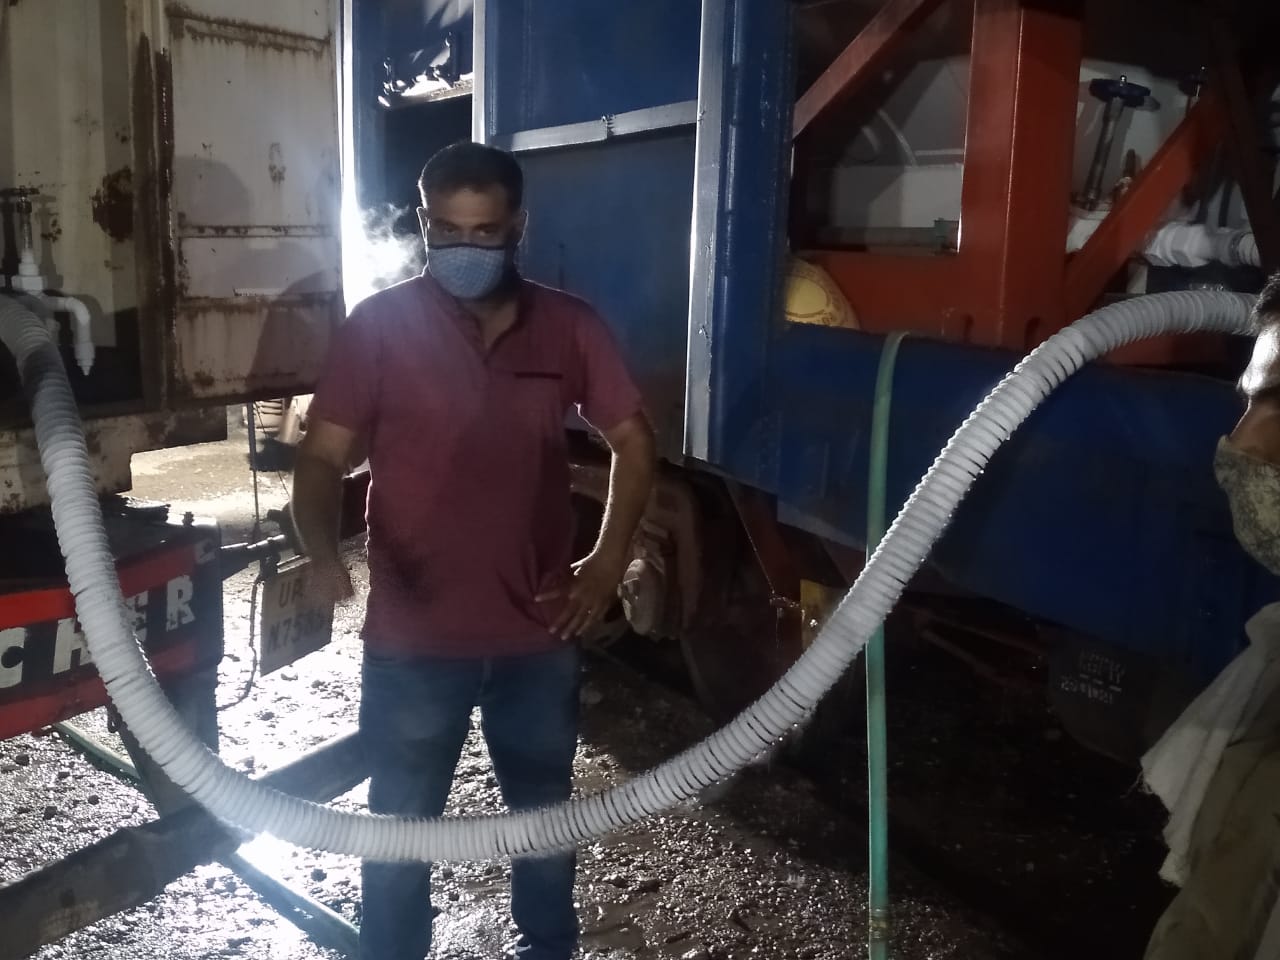 Decanting from container of Jeevan Rakshak express to Tanker.